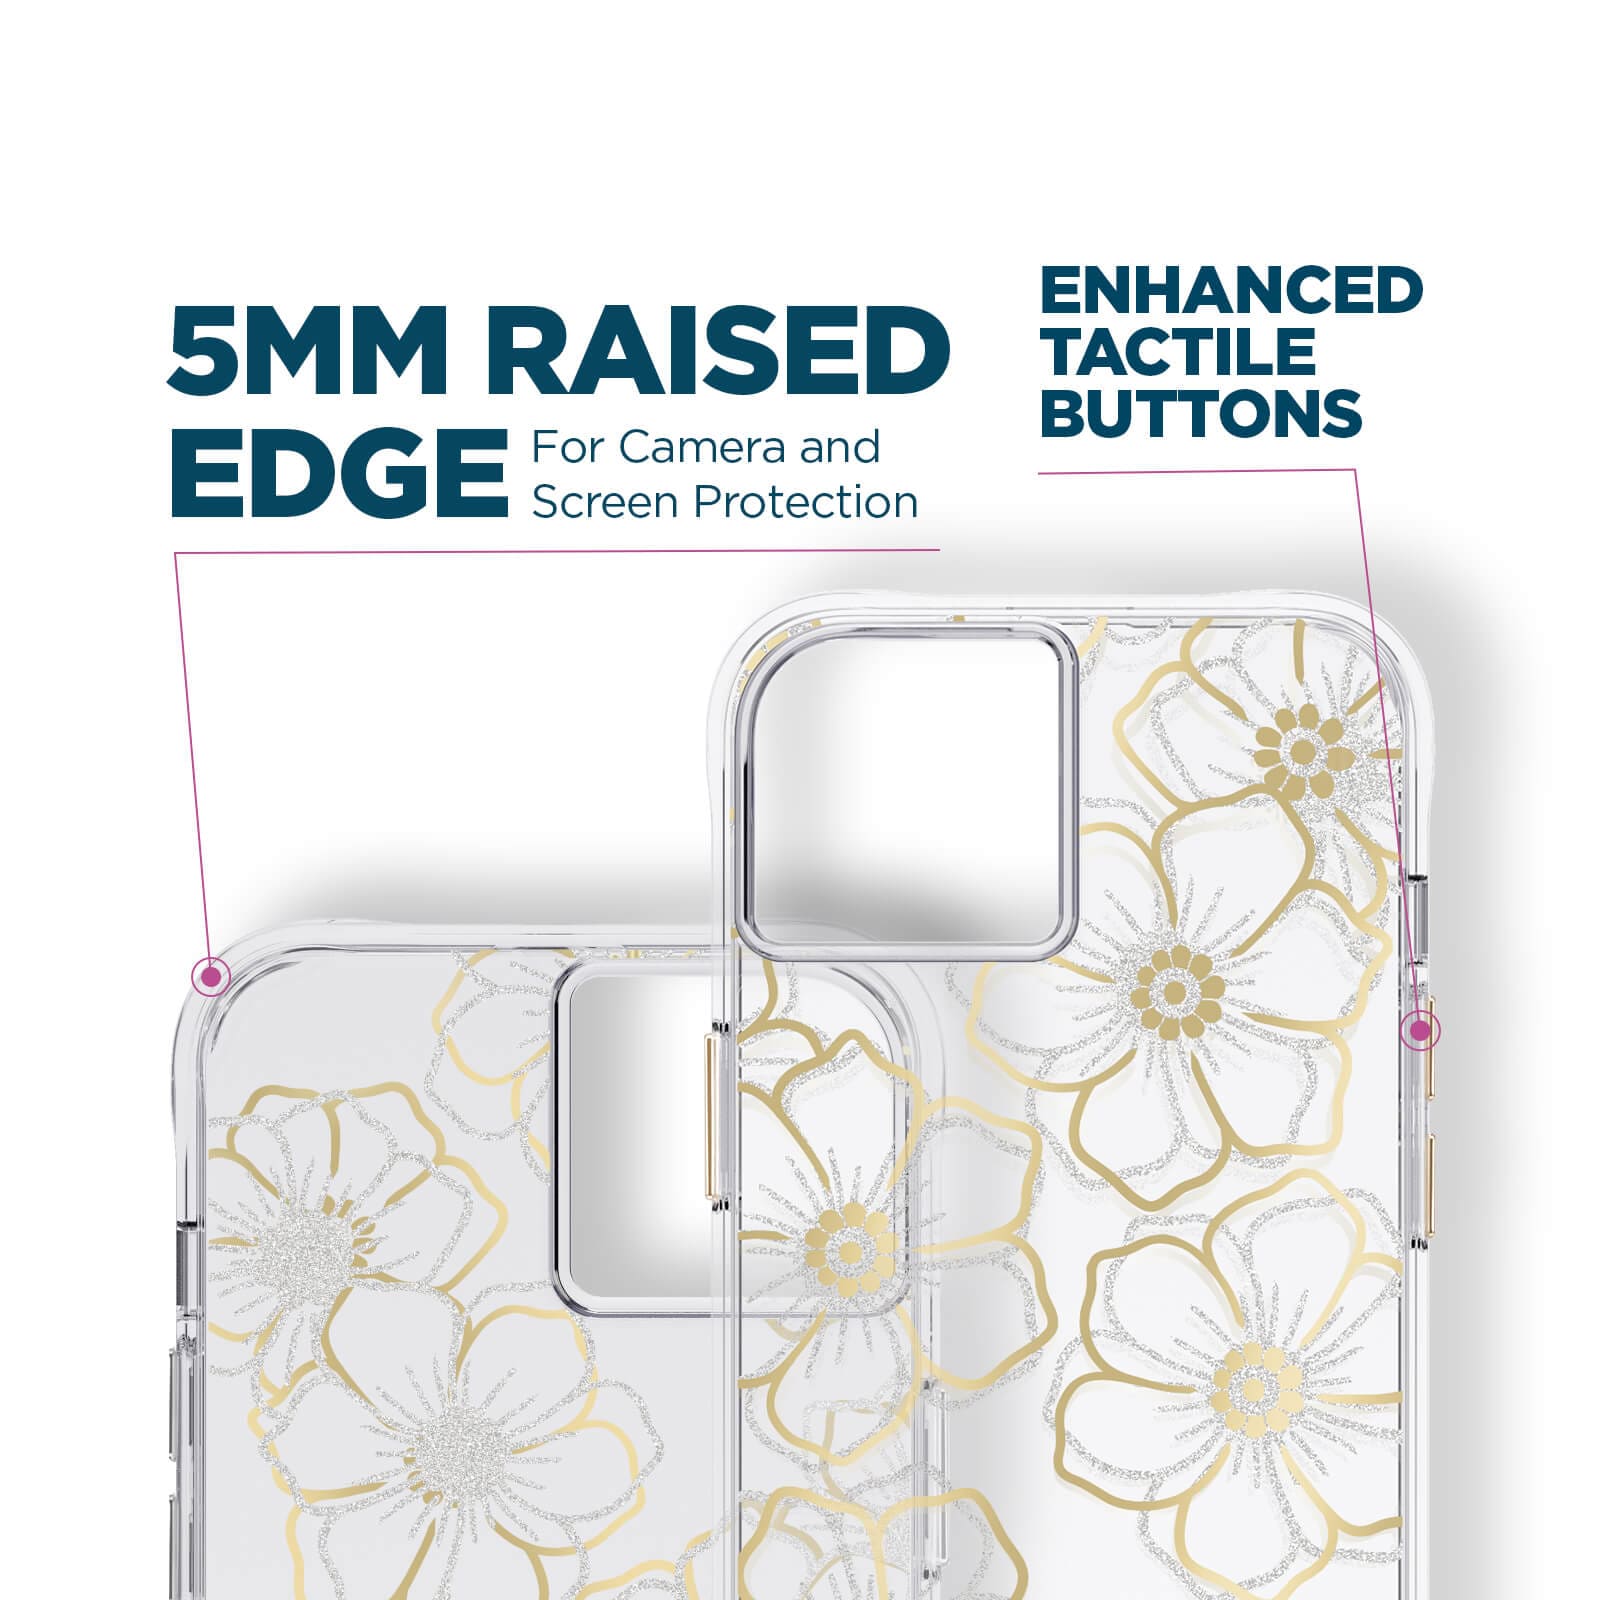 5mm raised edge for camera and screen protection. Enhanced tactile buttons. color::Floral Gems